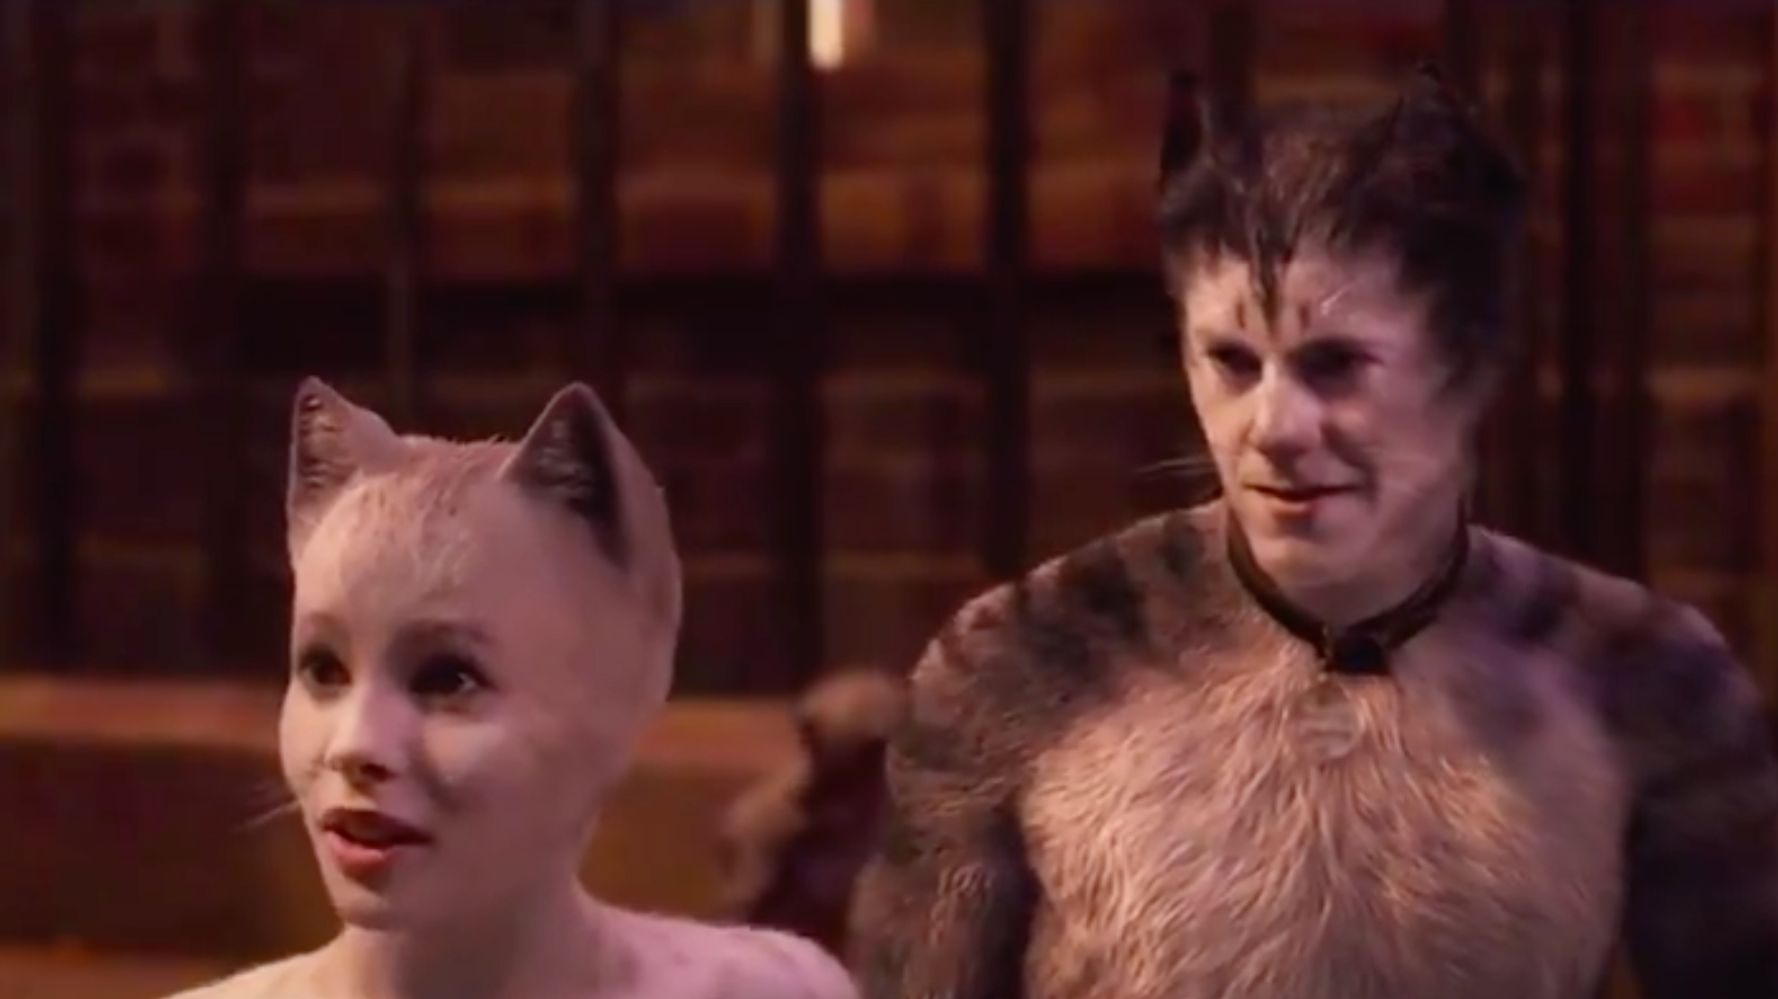 The New Cats Movie With Taylor Swift Looks Like An